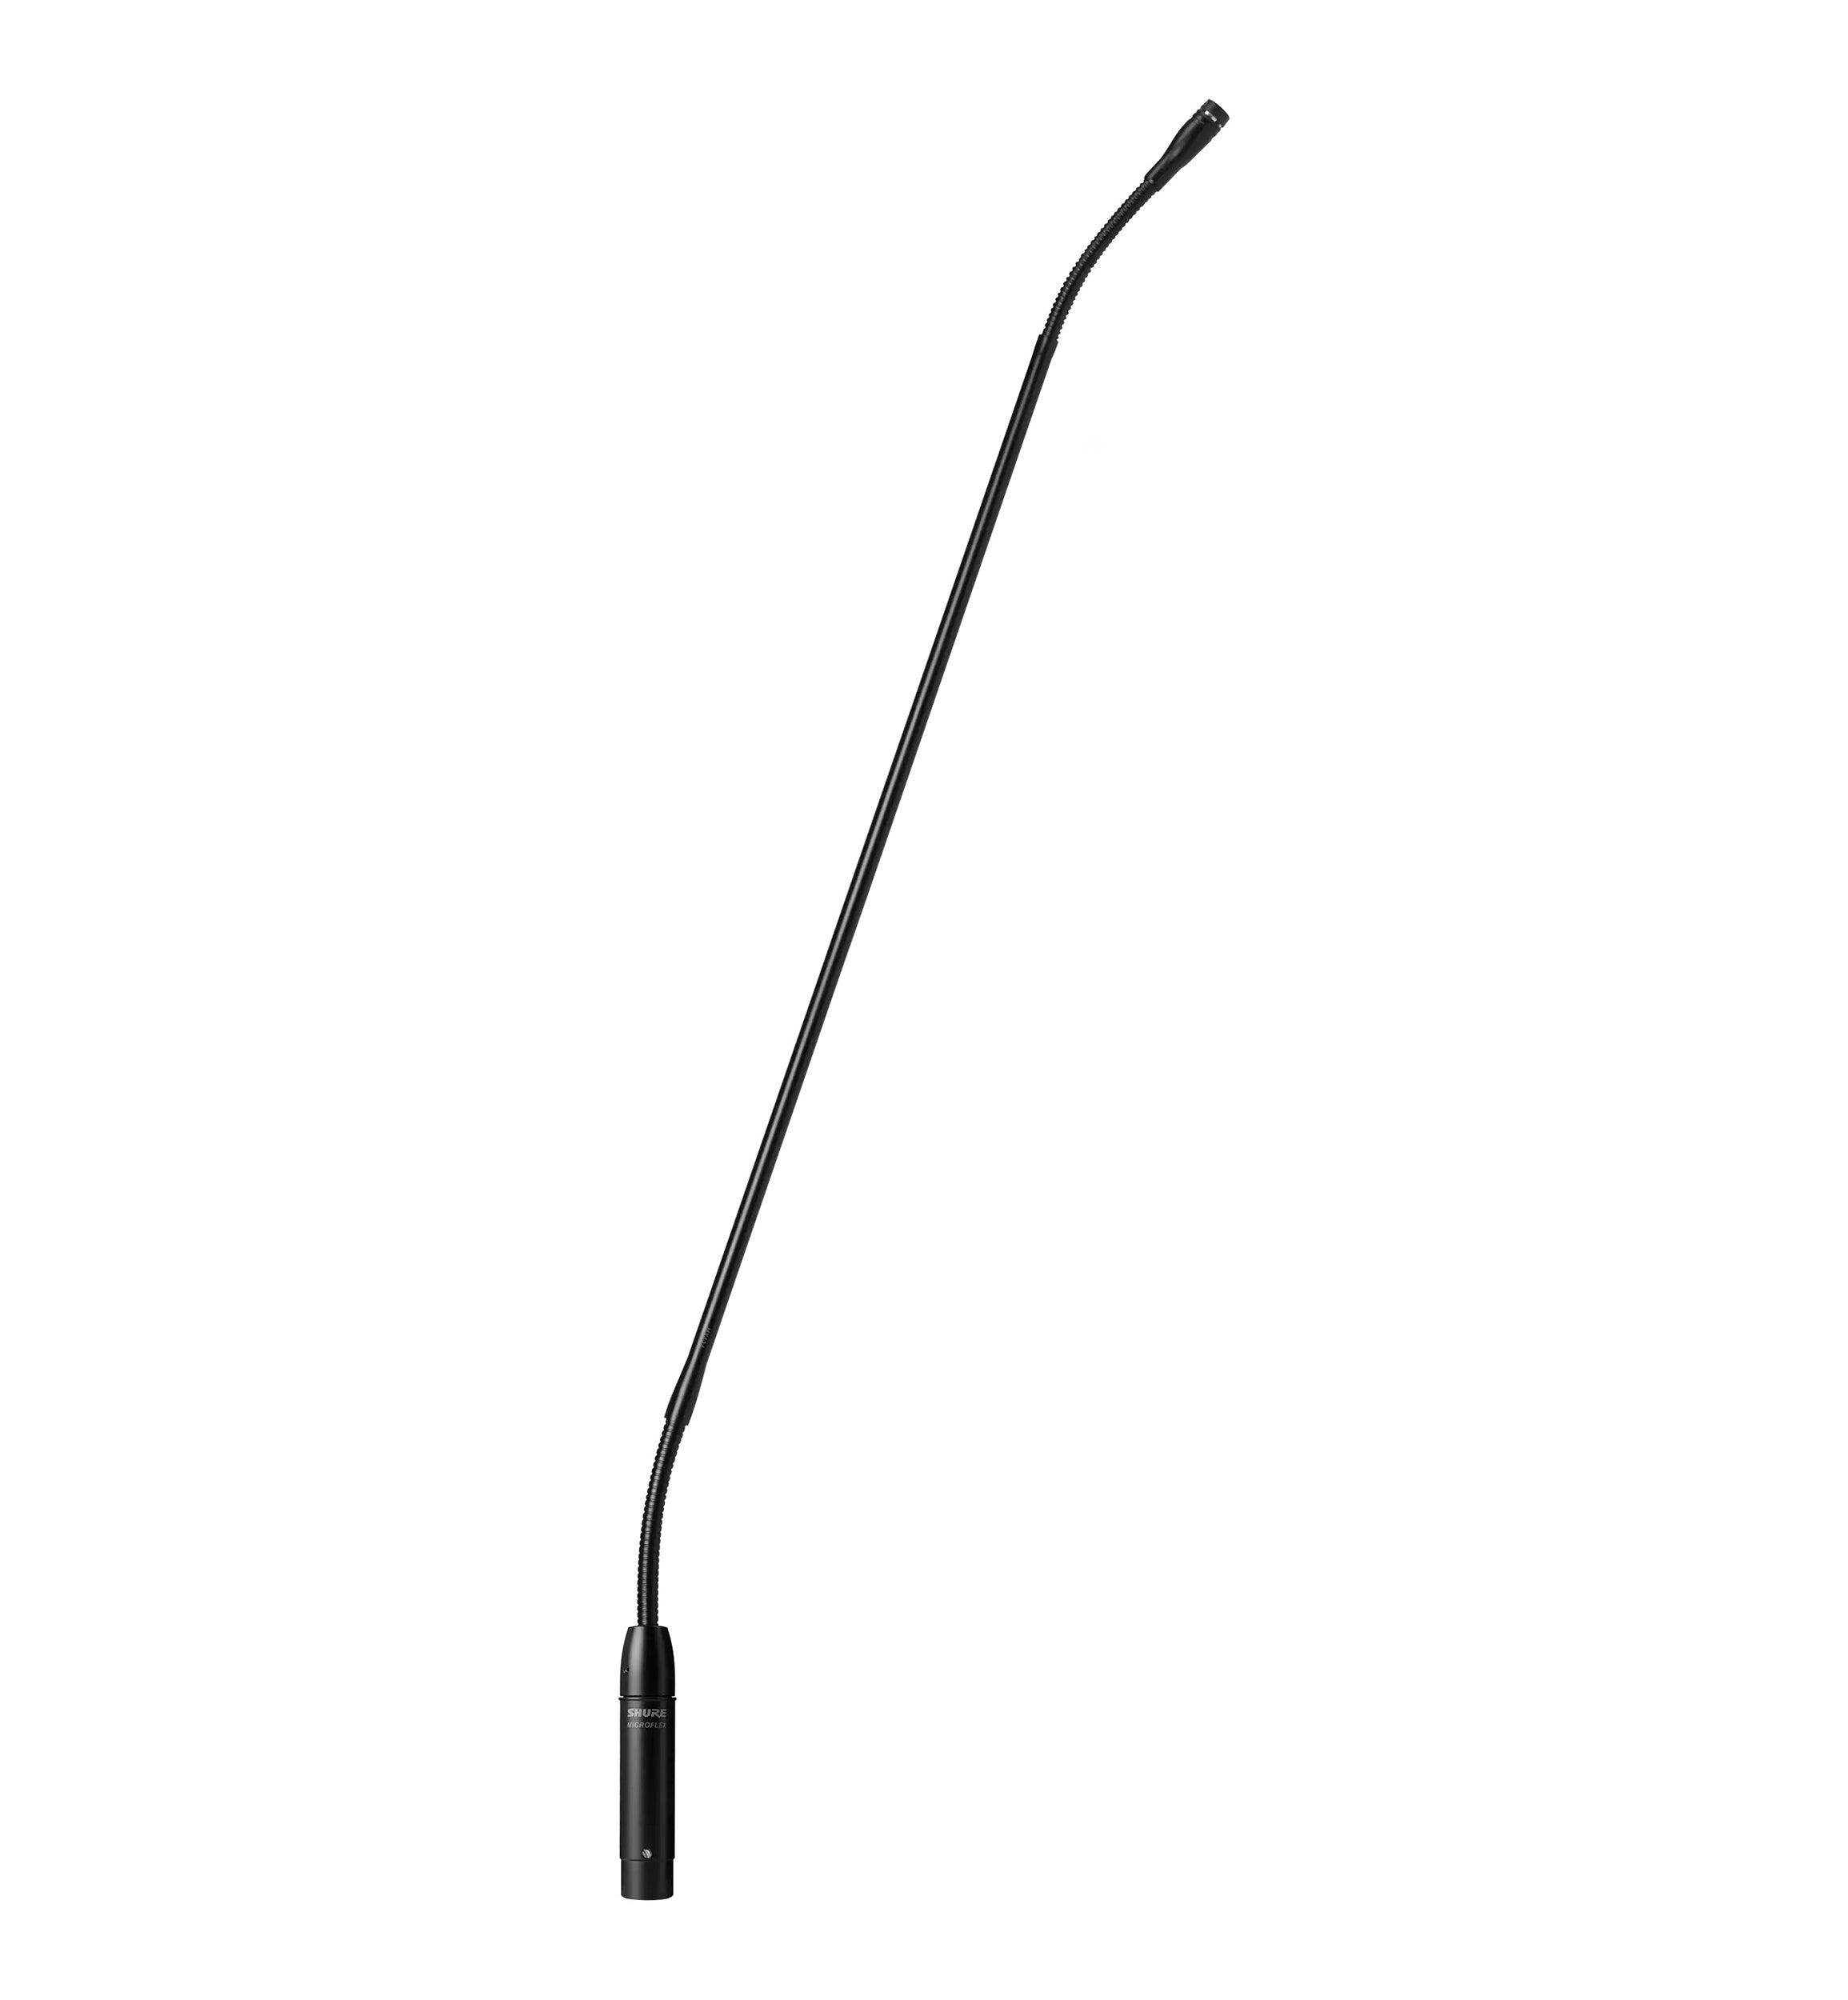 Shure MX424/N, 24-Inch Micro Flex Gooseneck Condenser Microphone with Preamp by Shure